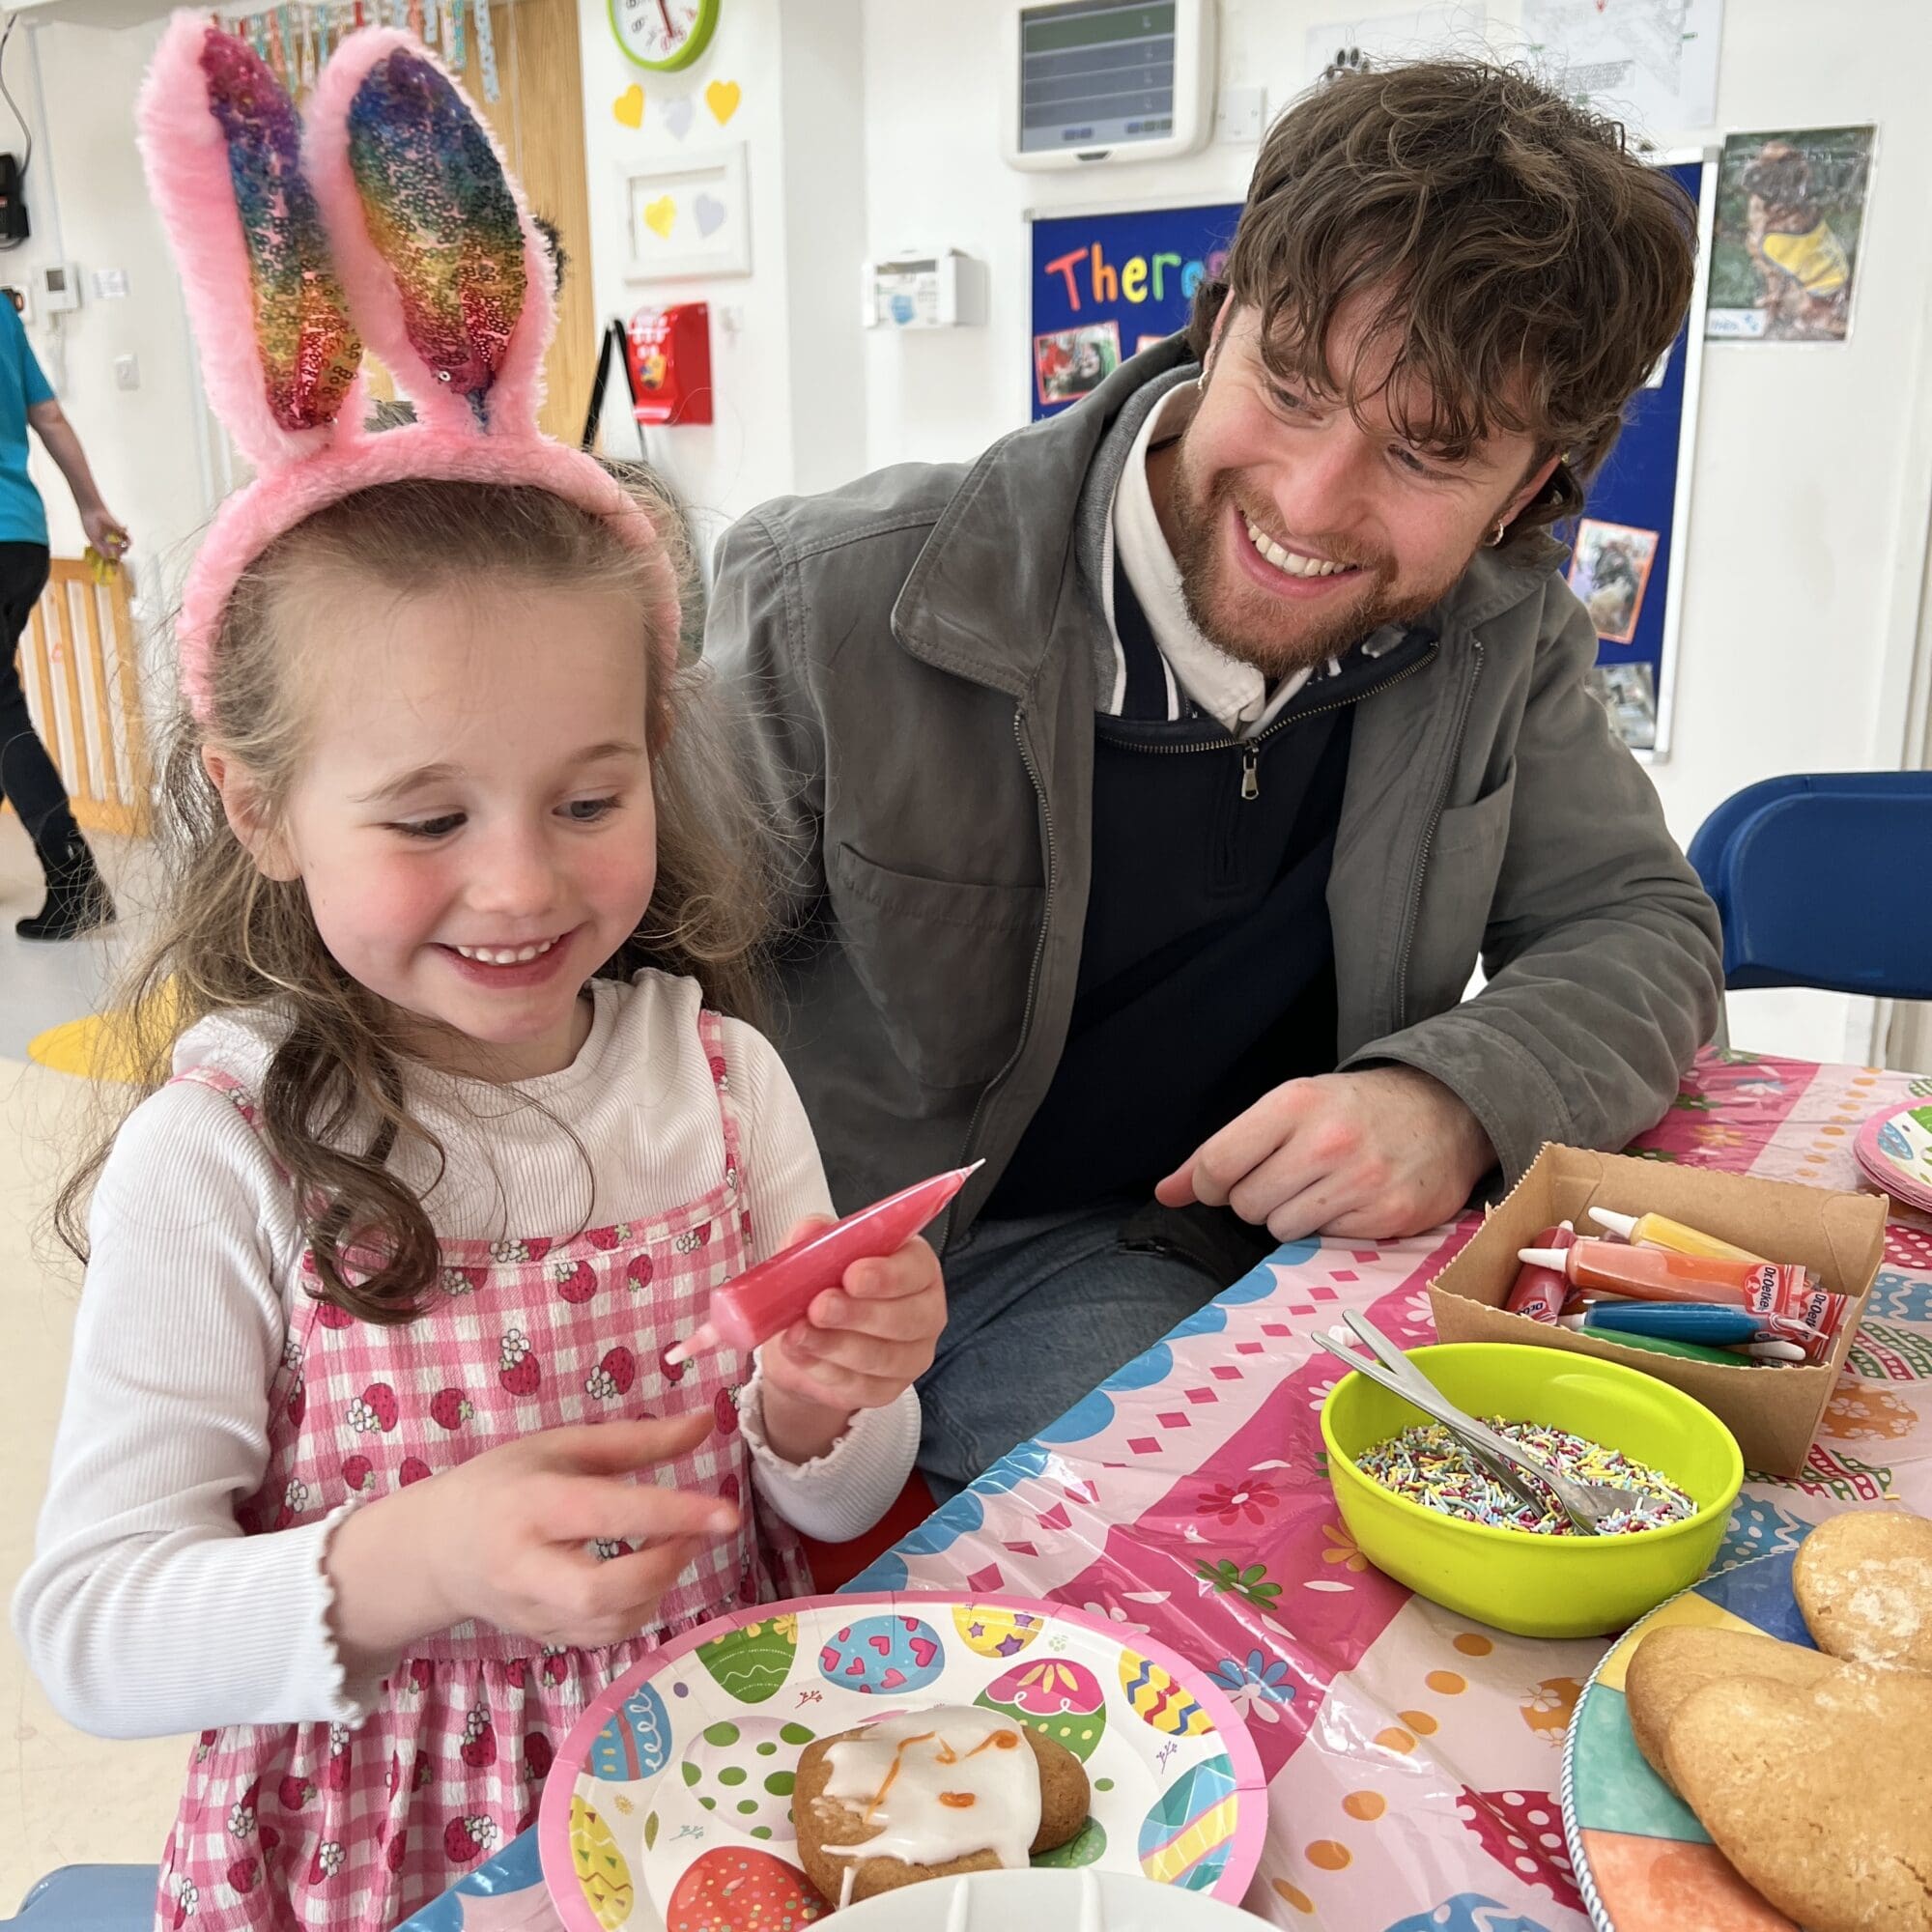 a little girl with bunny ears on smiling making easter biscuits with her father smiling at her